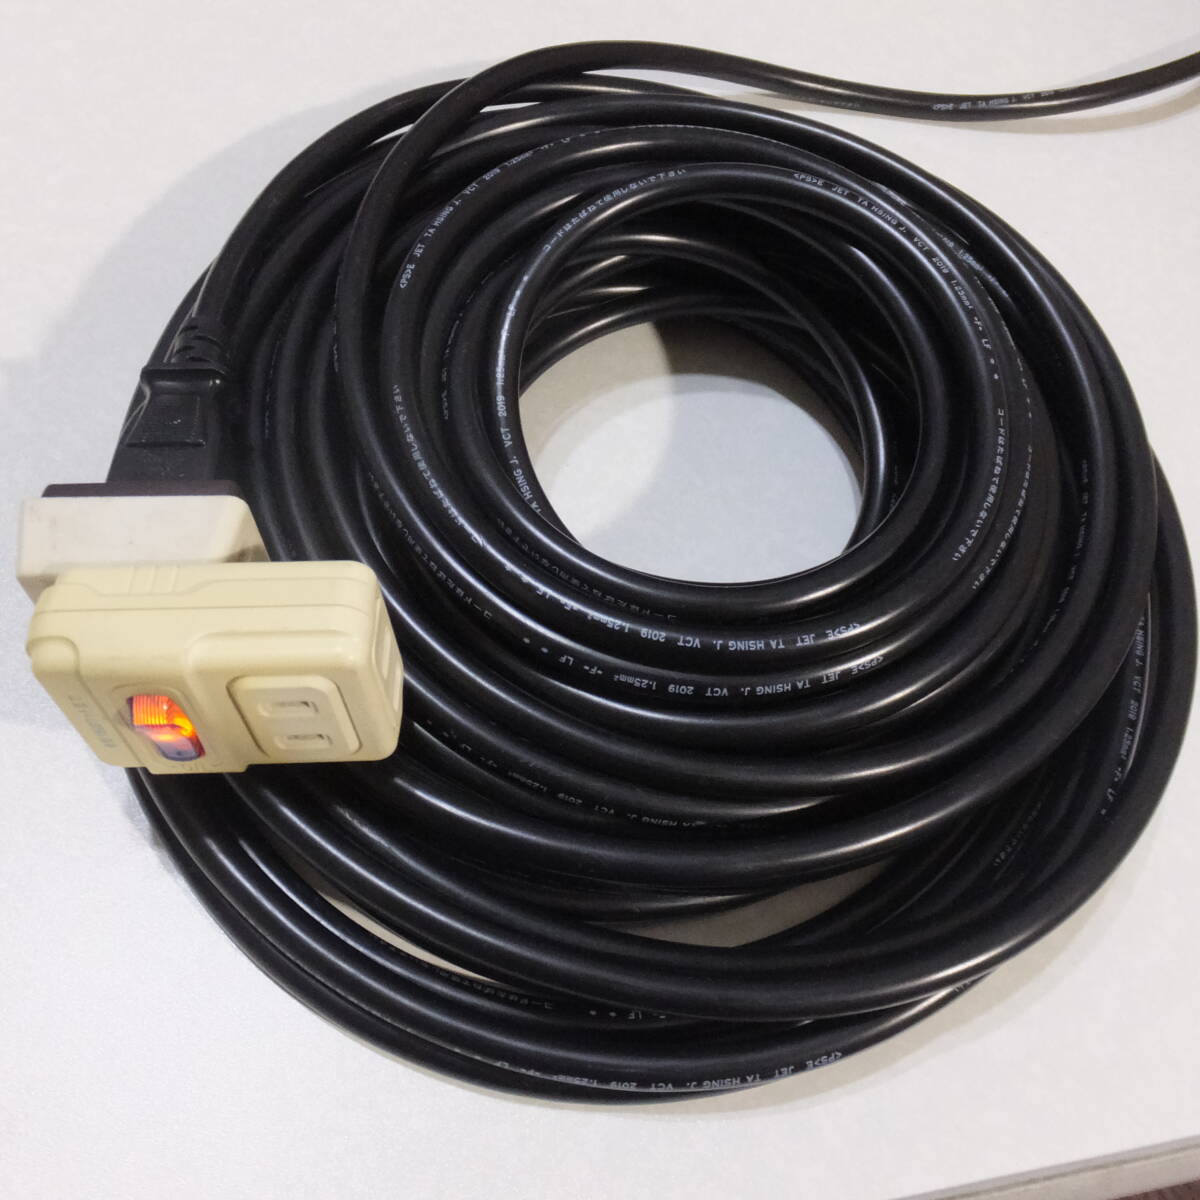 ** long 20m* extender * power supply cable *LED switch attaching 2.+3.. outlet tap **